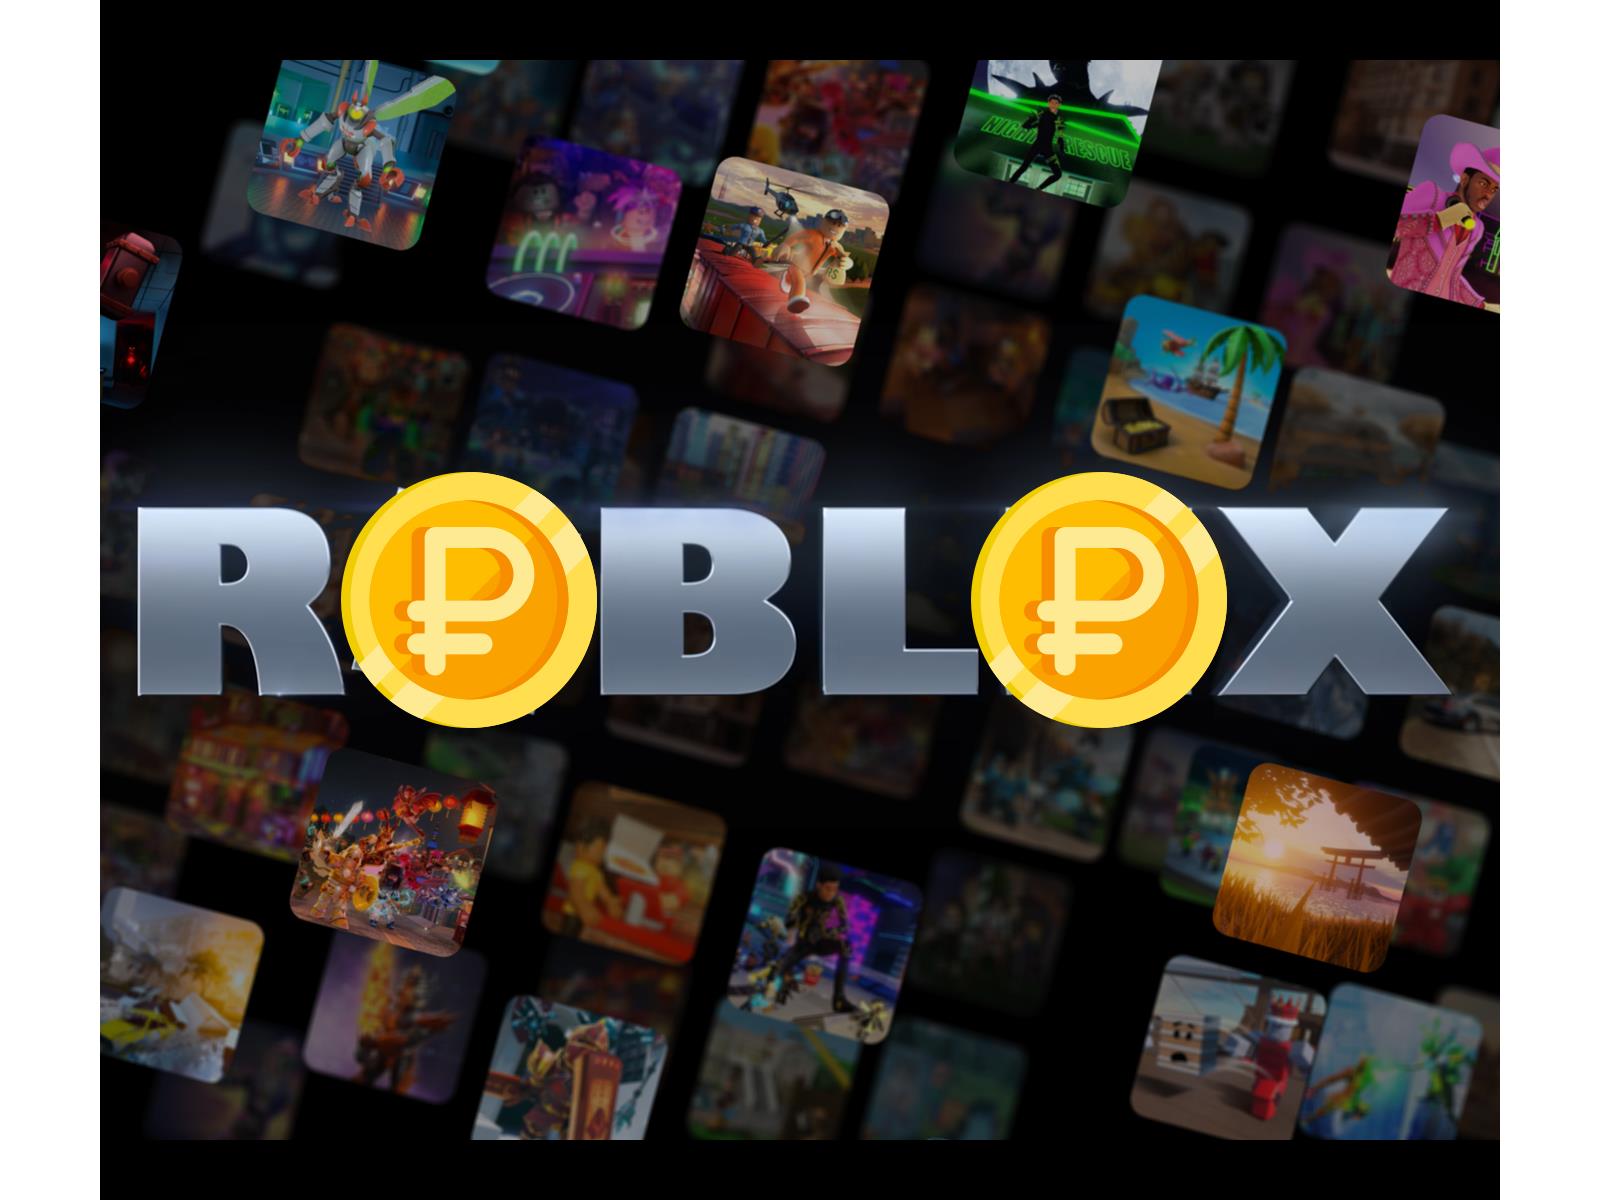 Roblox Robux Robles mobile game PC XBOX game 2021 international service Roblox  R currency points